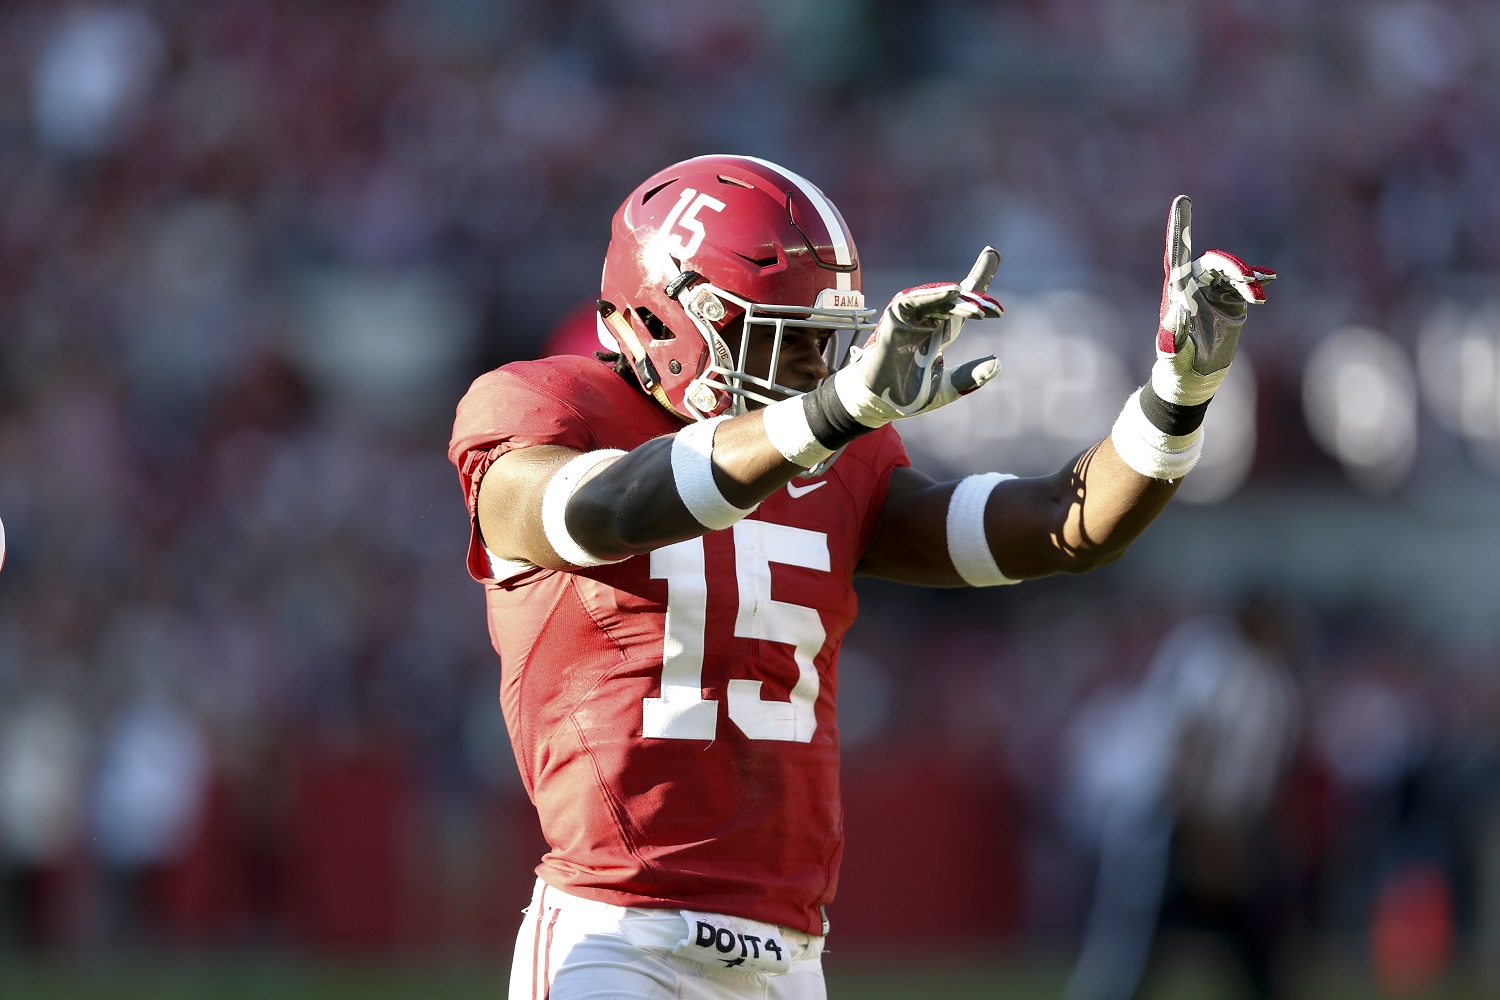 Alabama defensive back Ronnie Harrison celebrates during the first half of the Iron Bowl NCAA college football game, Saturday, Nov. 26, 2016, in Tuscaloosa, Ala. (AP Photo/Brynn Anderson)